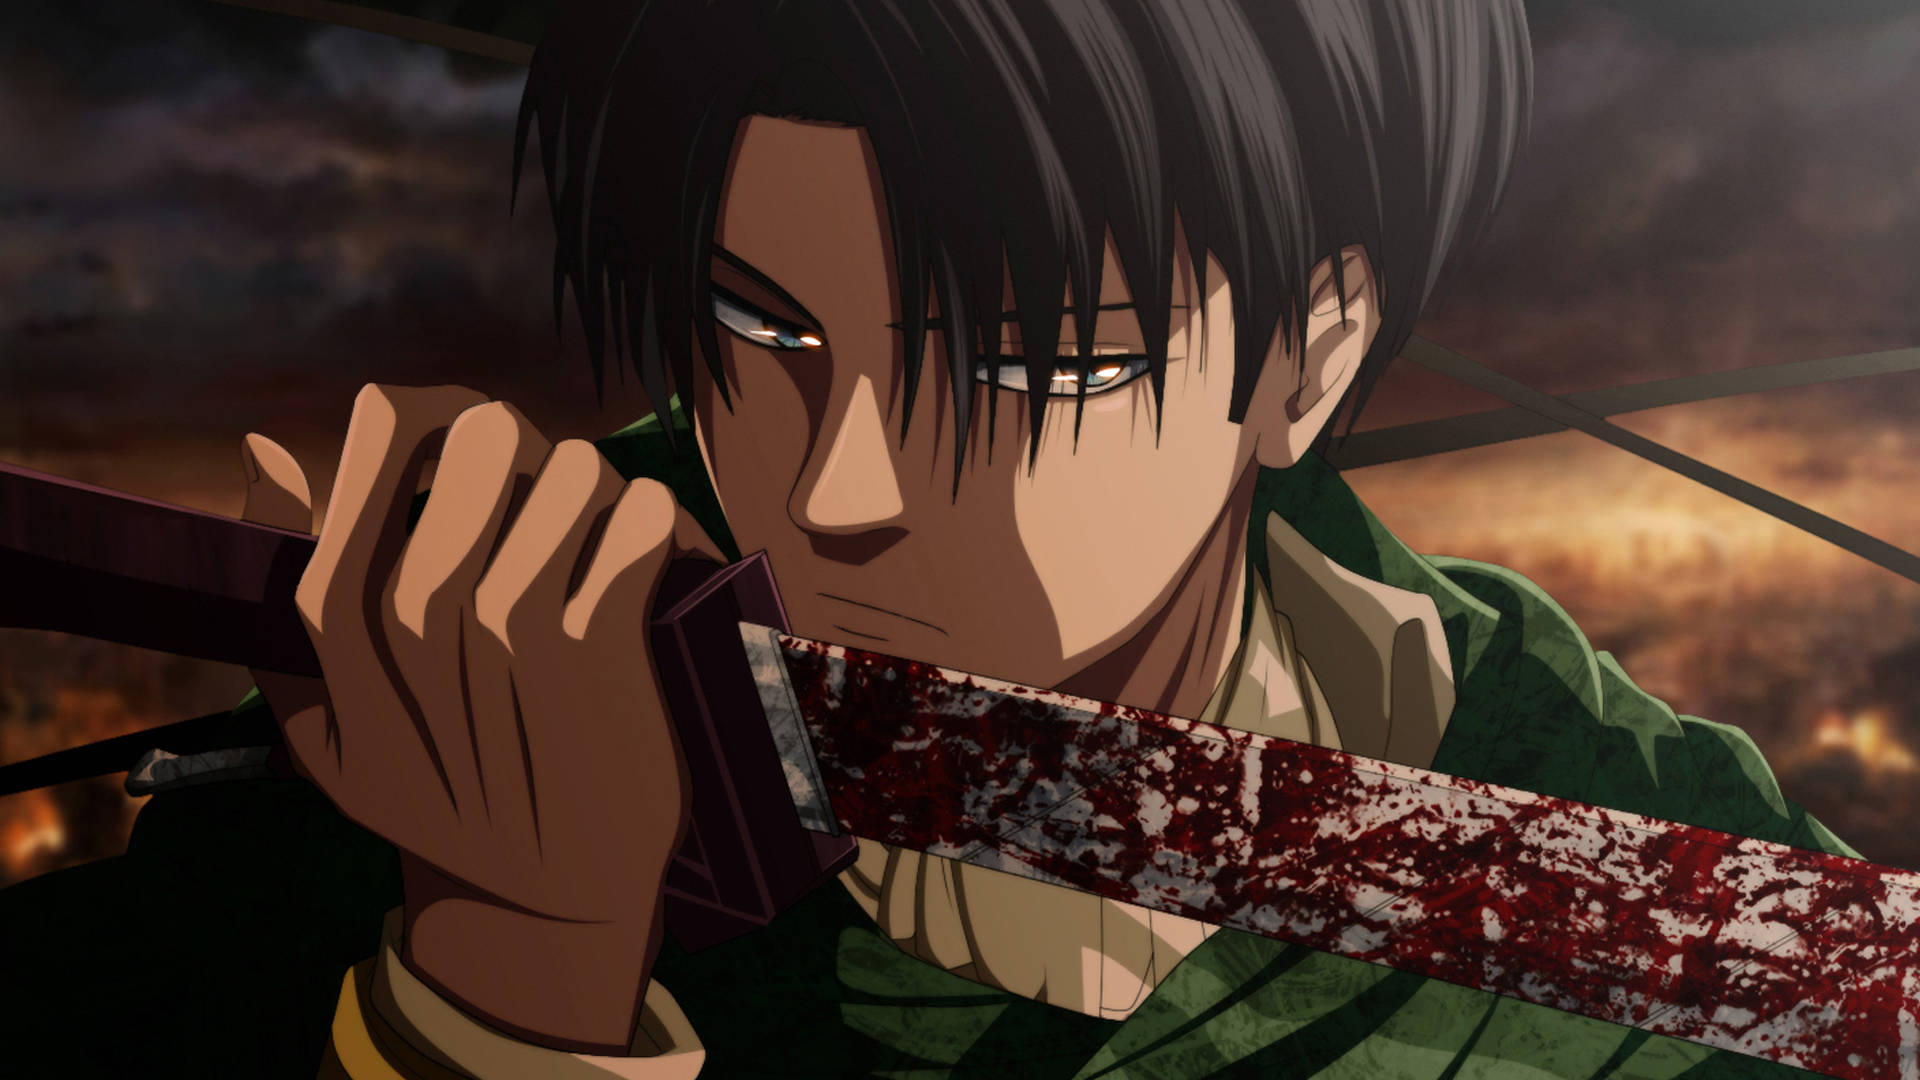 Levi Ackerman slashes at his foes with his prized sword. Wallpaper